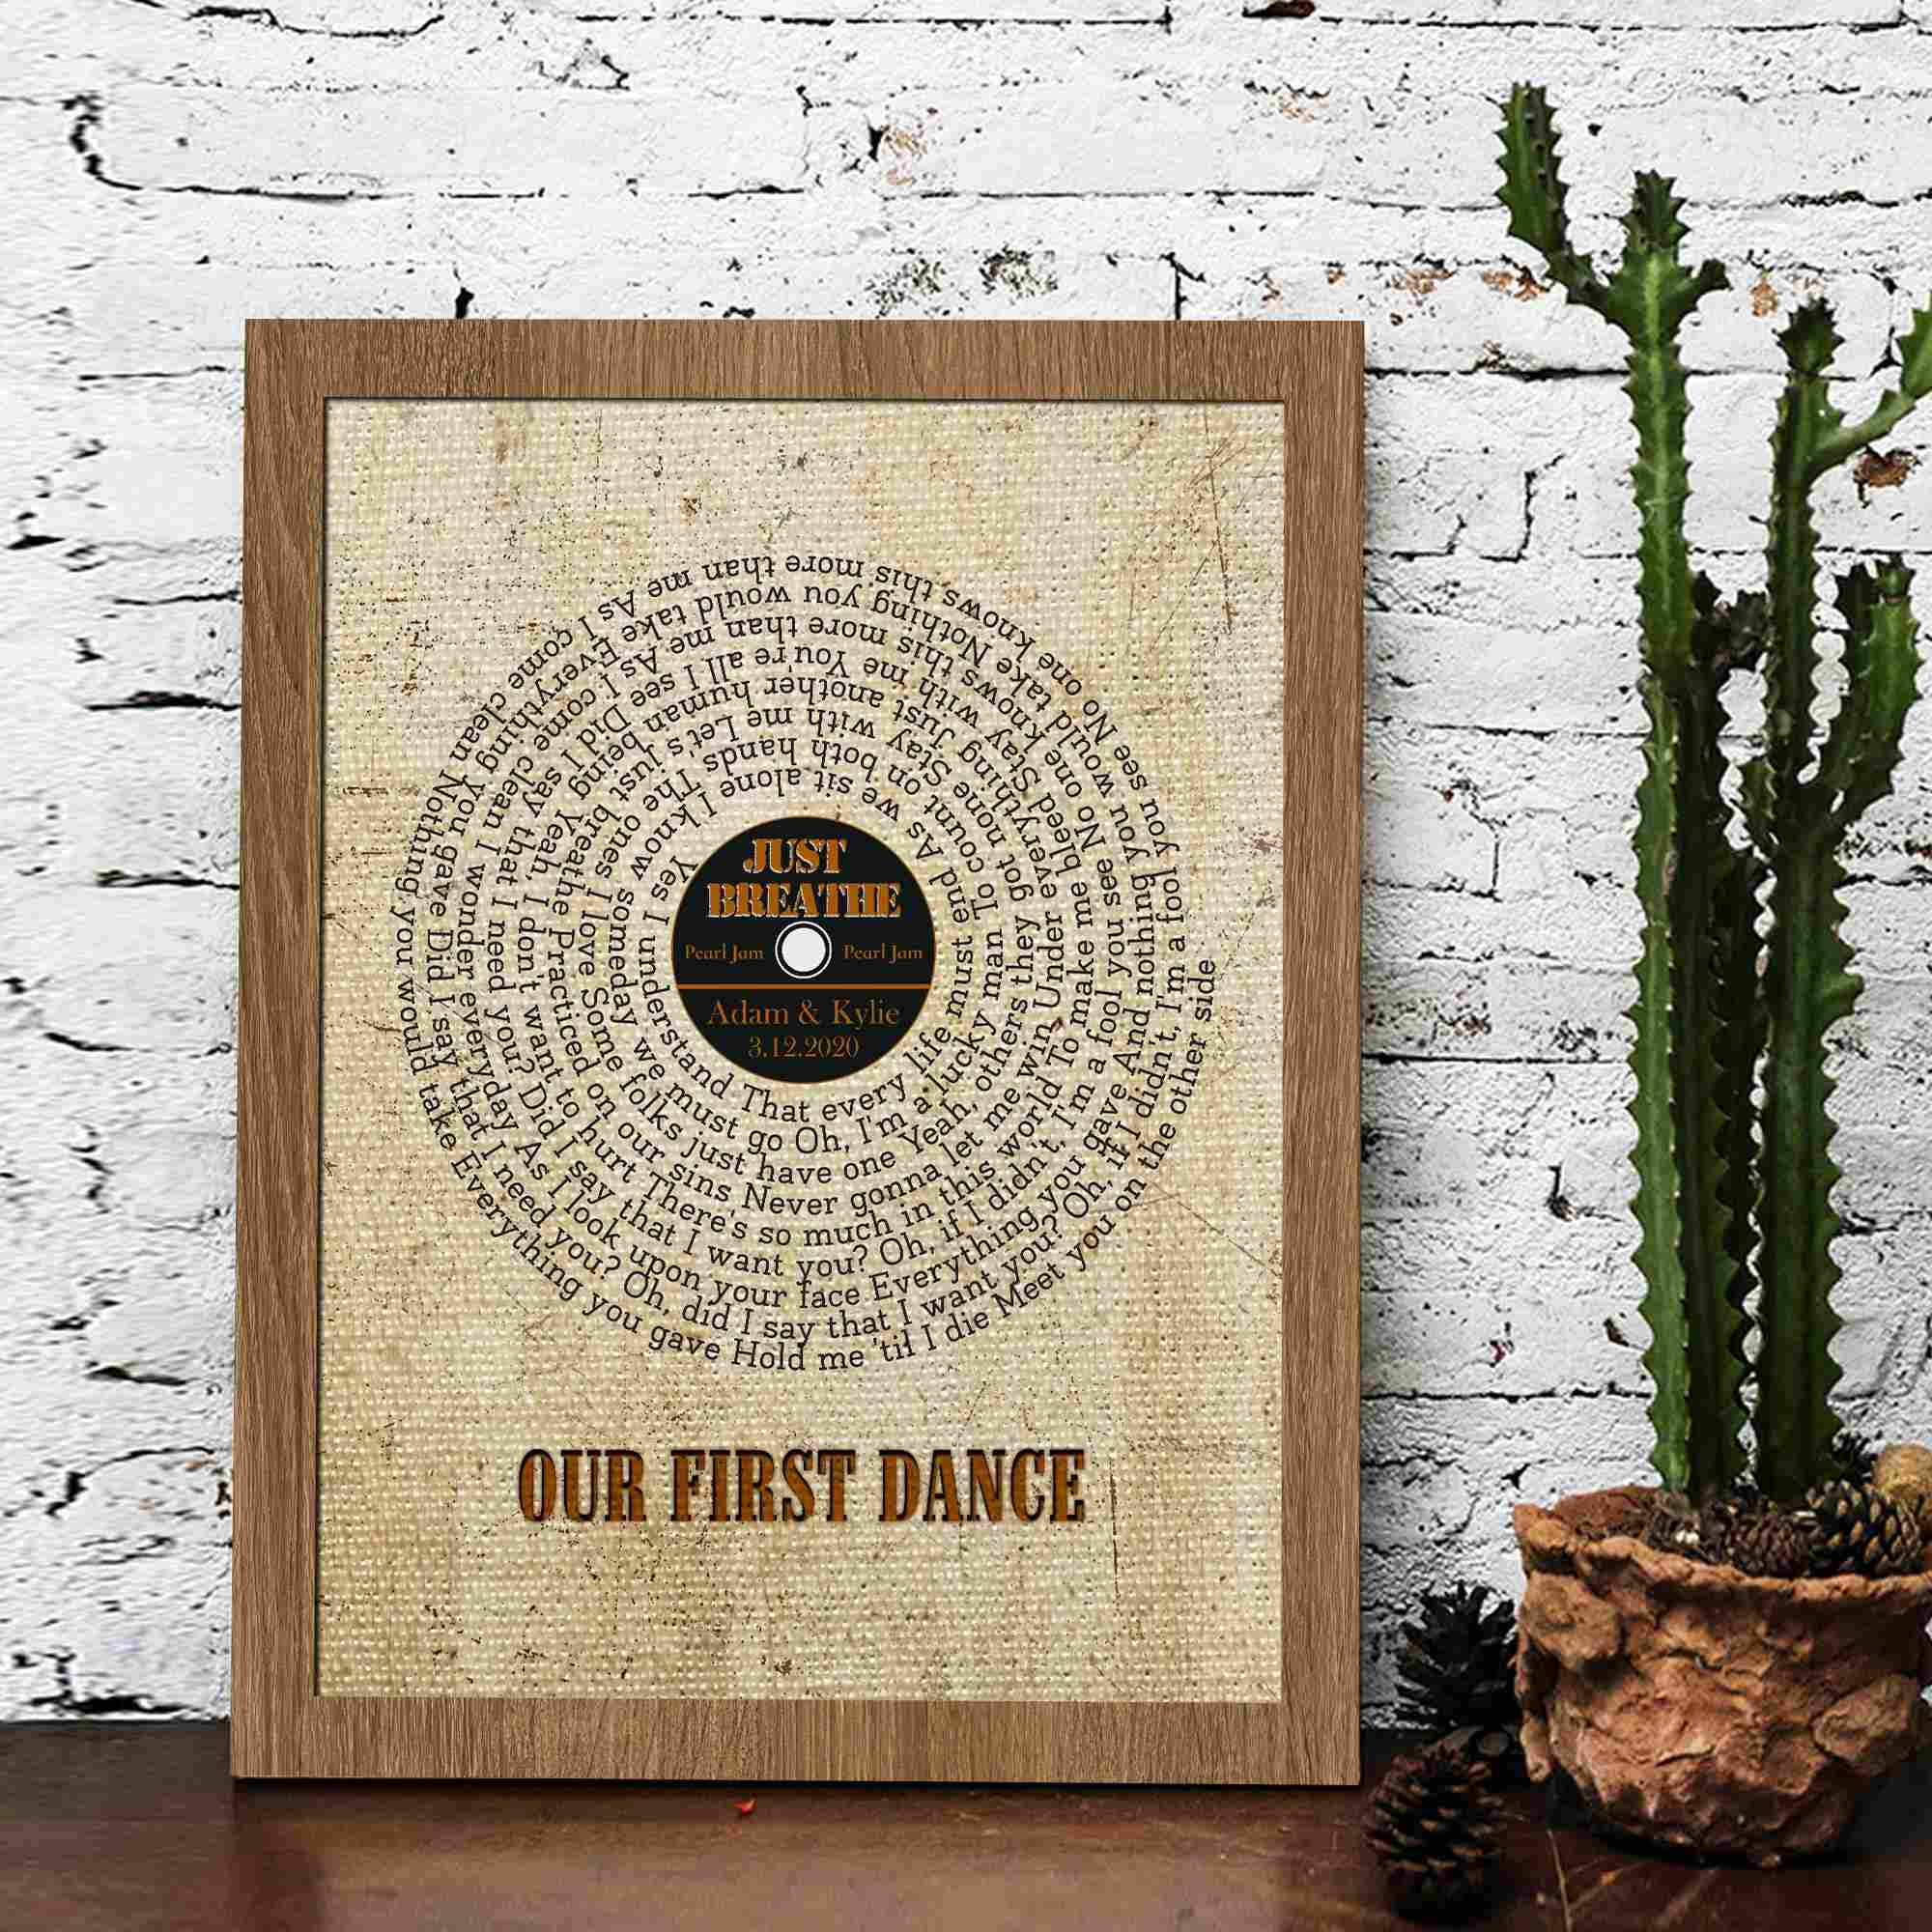 Custom Record Vinyl 50th Anniversary Gifts for Parents, Golden Wedding Anniversary, 50 Year Anniversary Gifts, Vinyl wedding gifts